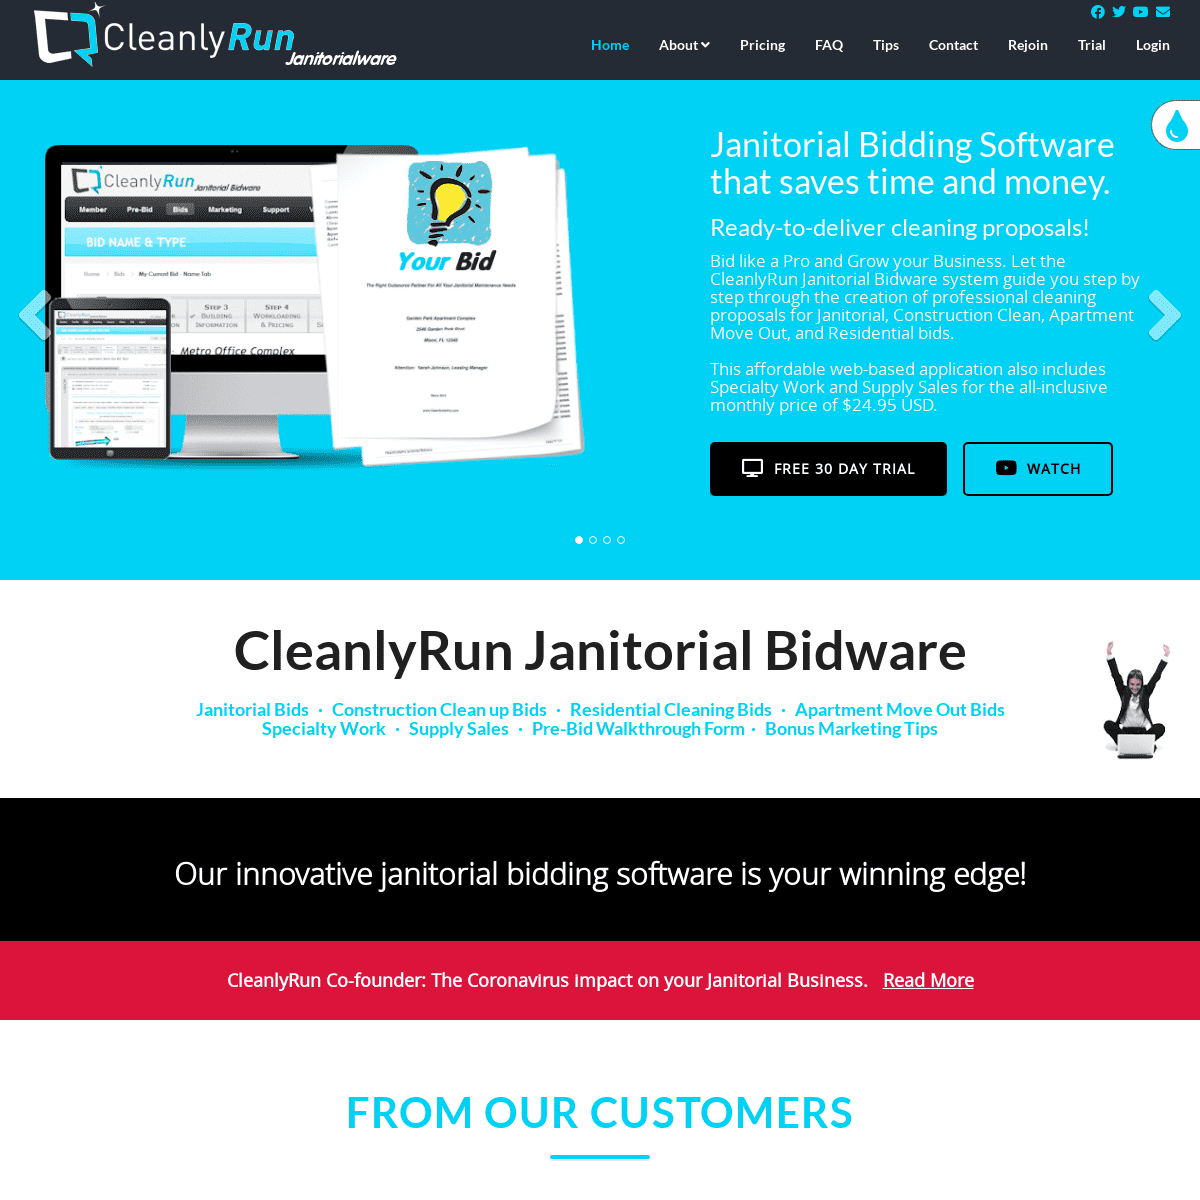 A complete backup of cleanlyrun.com